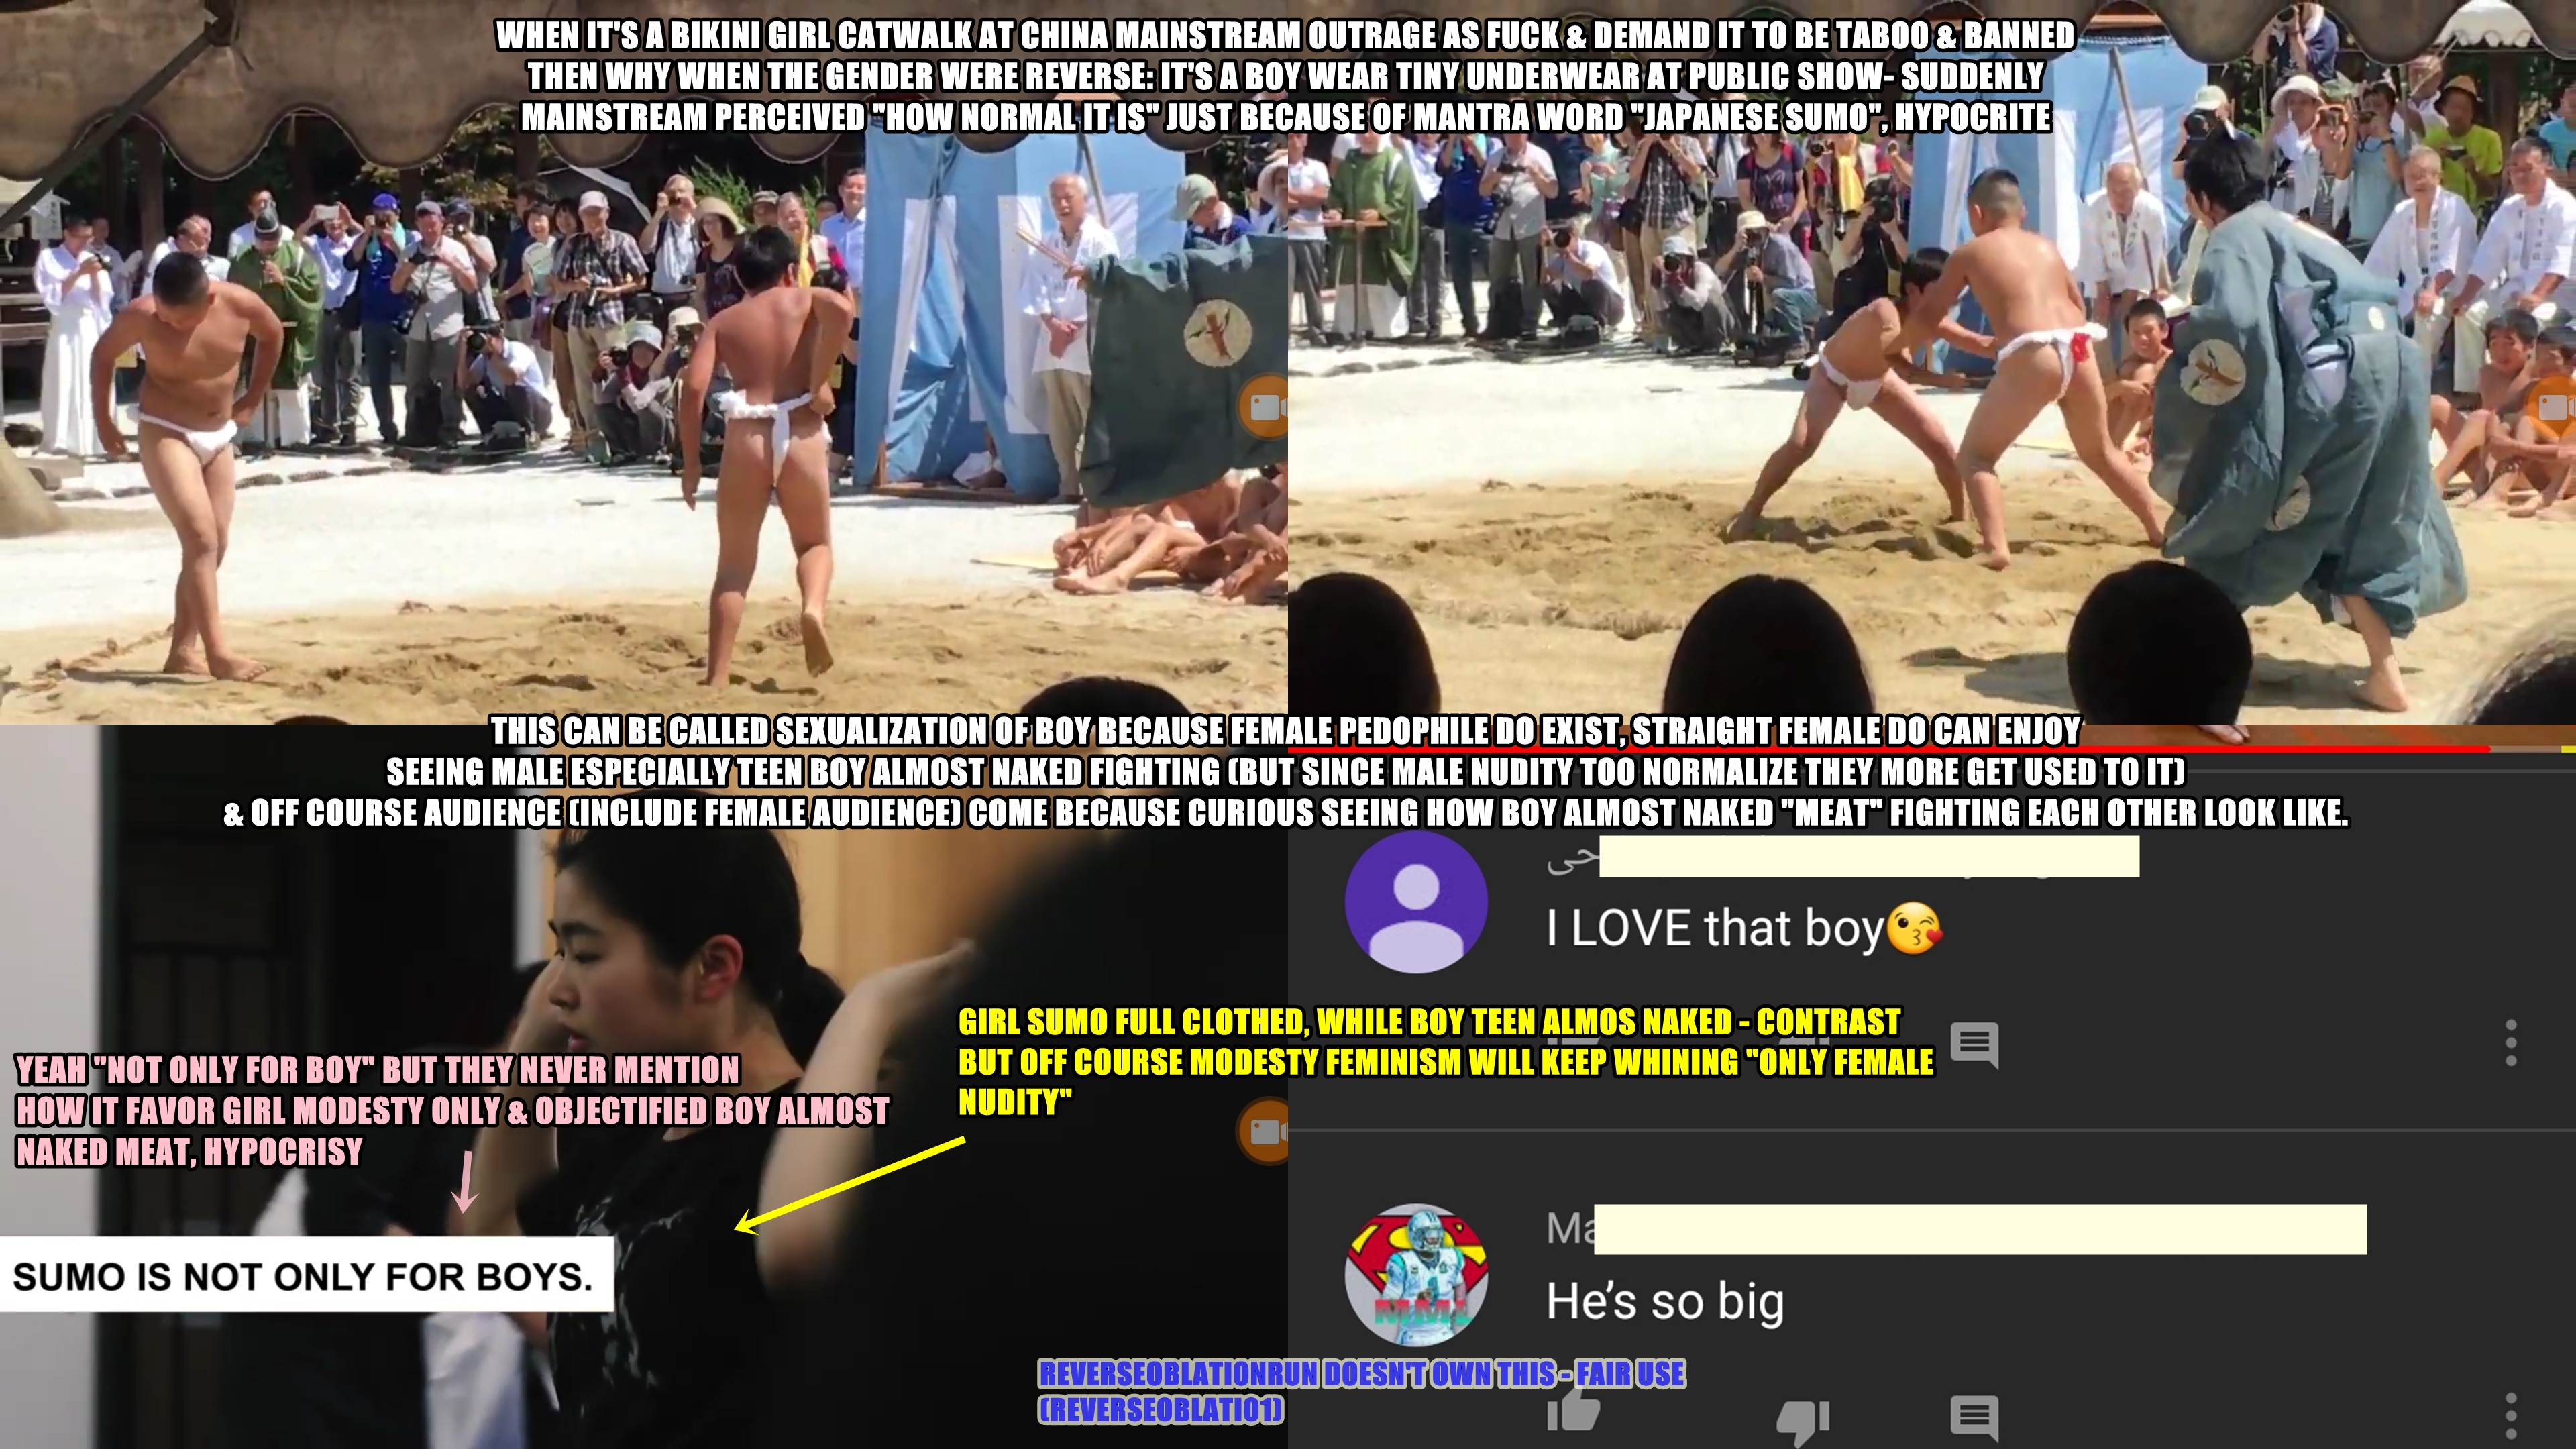 Sex negative (modesty type) feminism only care little girl modesty (bikini catwalk) while completely ignoring sexualization of our boy (Teen boy sumo + public indoor boy circumcision- Tuli/ Khitan + Boy frontal pic